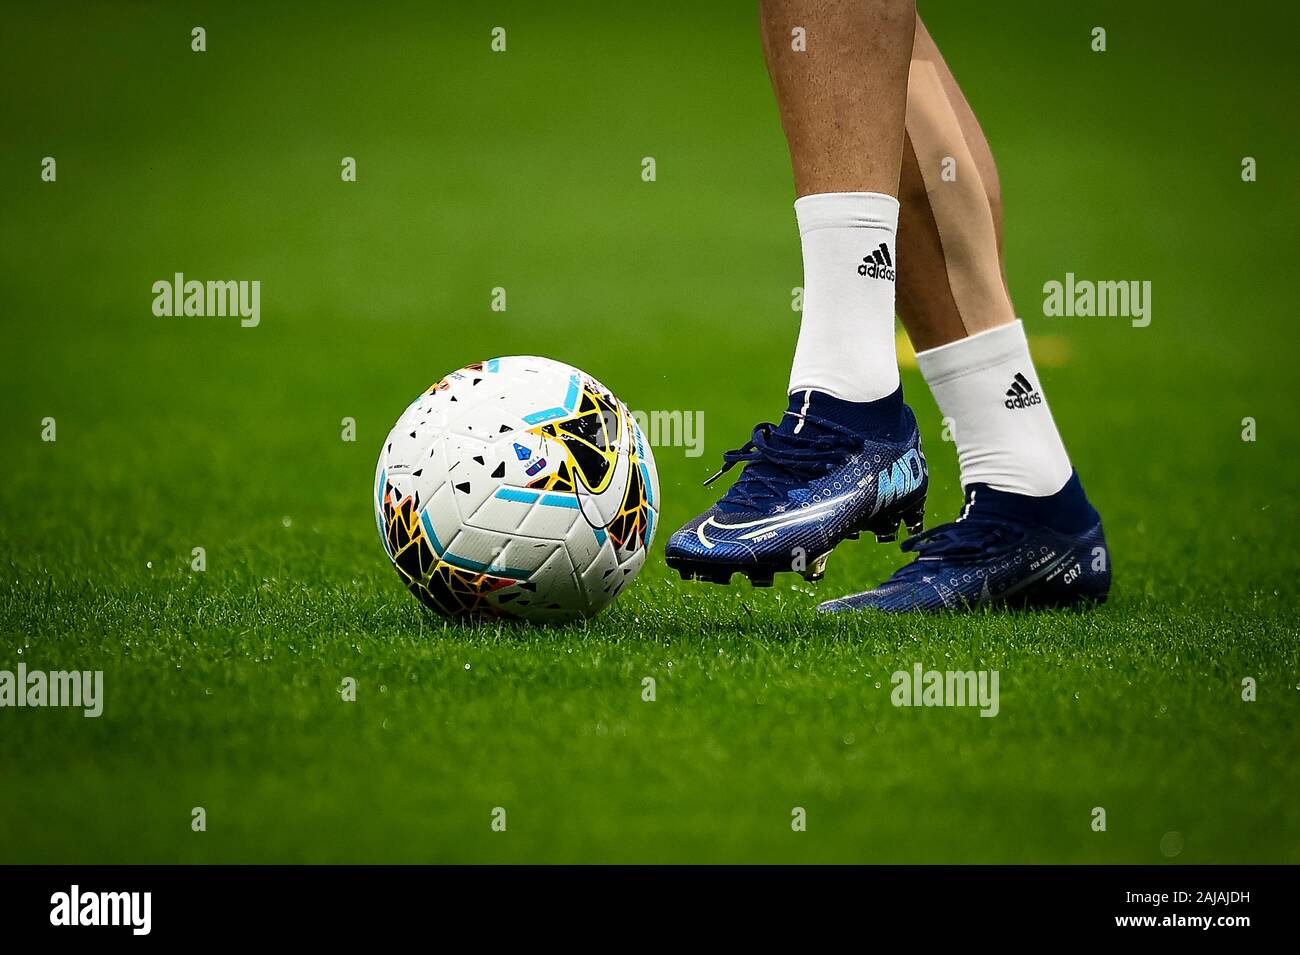 Milan, Italy. 6 October, 2019: A detail of Nike Mercurial Superfly 7 Elite  boots wearing by Cristiano Ronaldo and the official Serie A matchball Nike  Merlin are seen during warm up prior